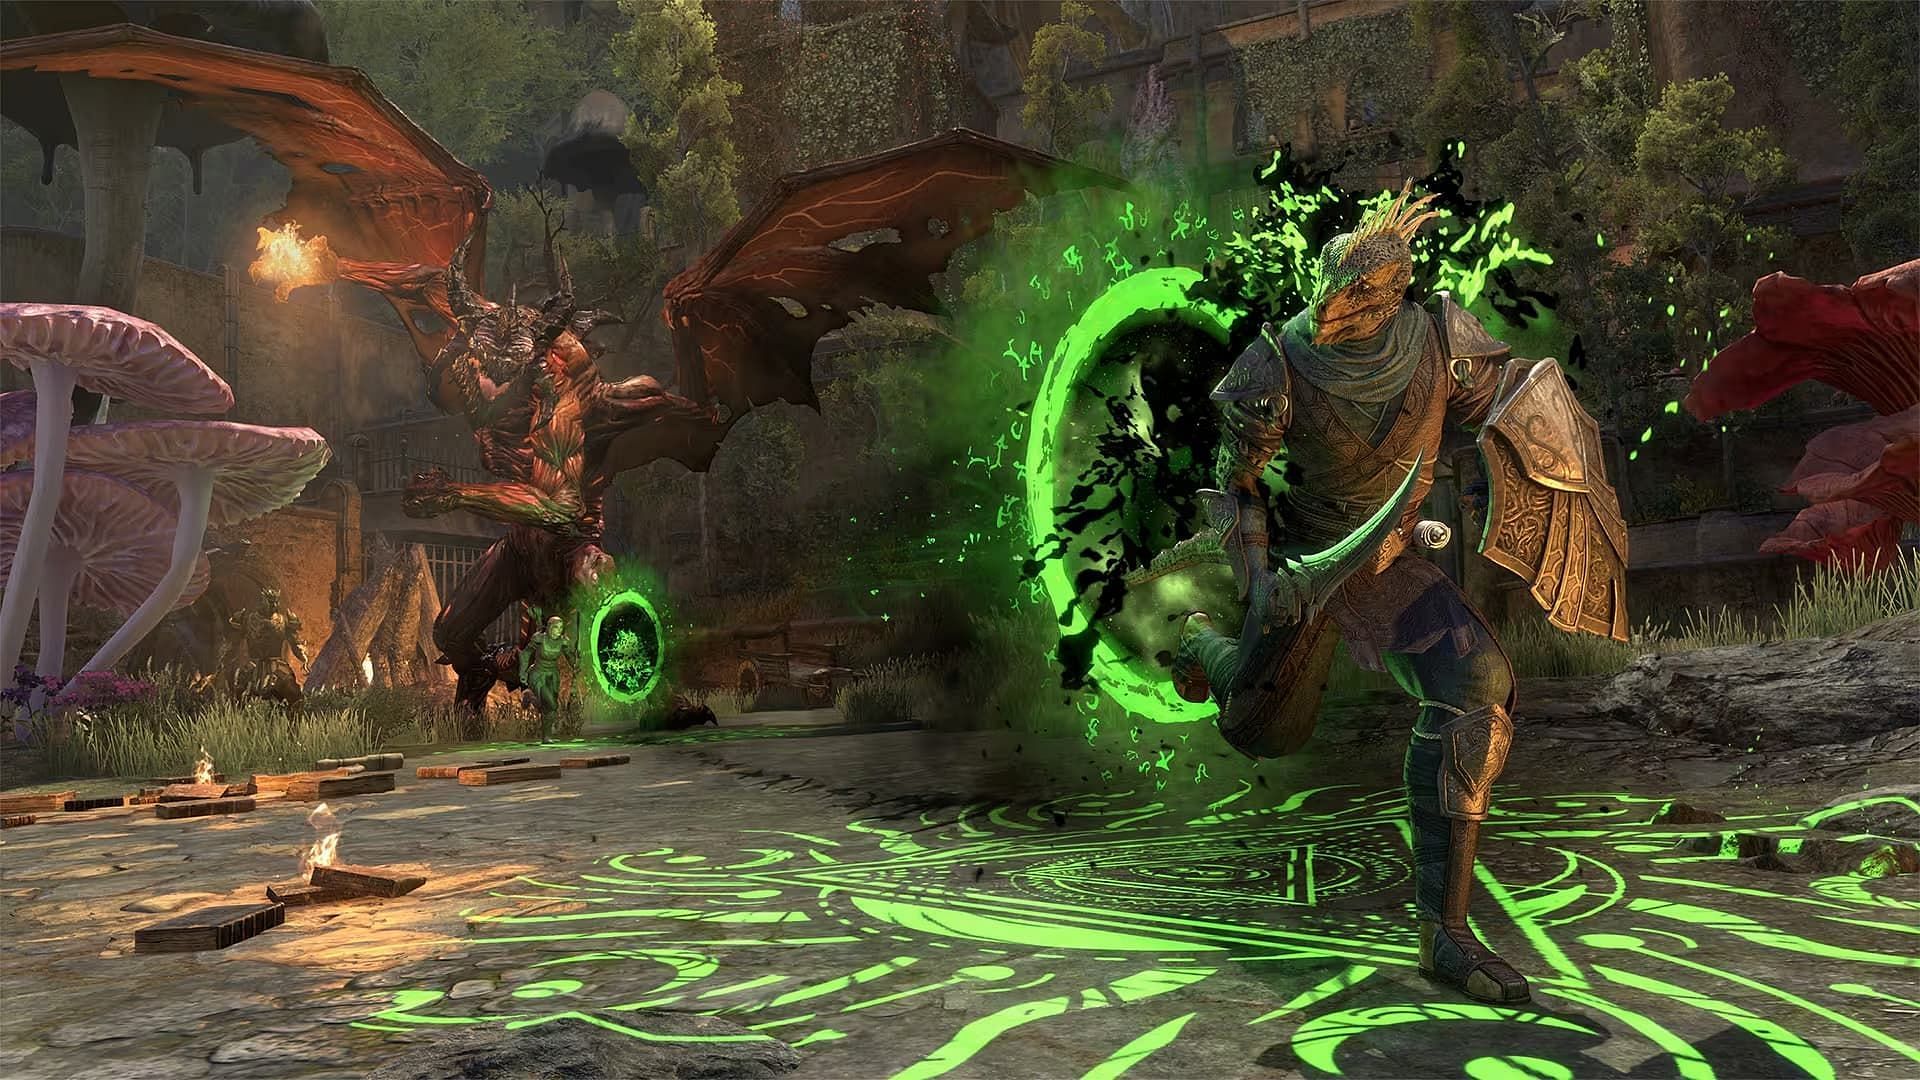 The Arcanist can be played as a tank in The Elder Scrolls Online (Image via ZeniMax Online Studios)